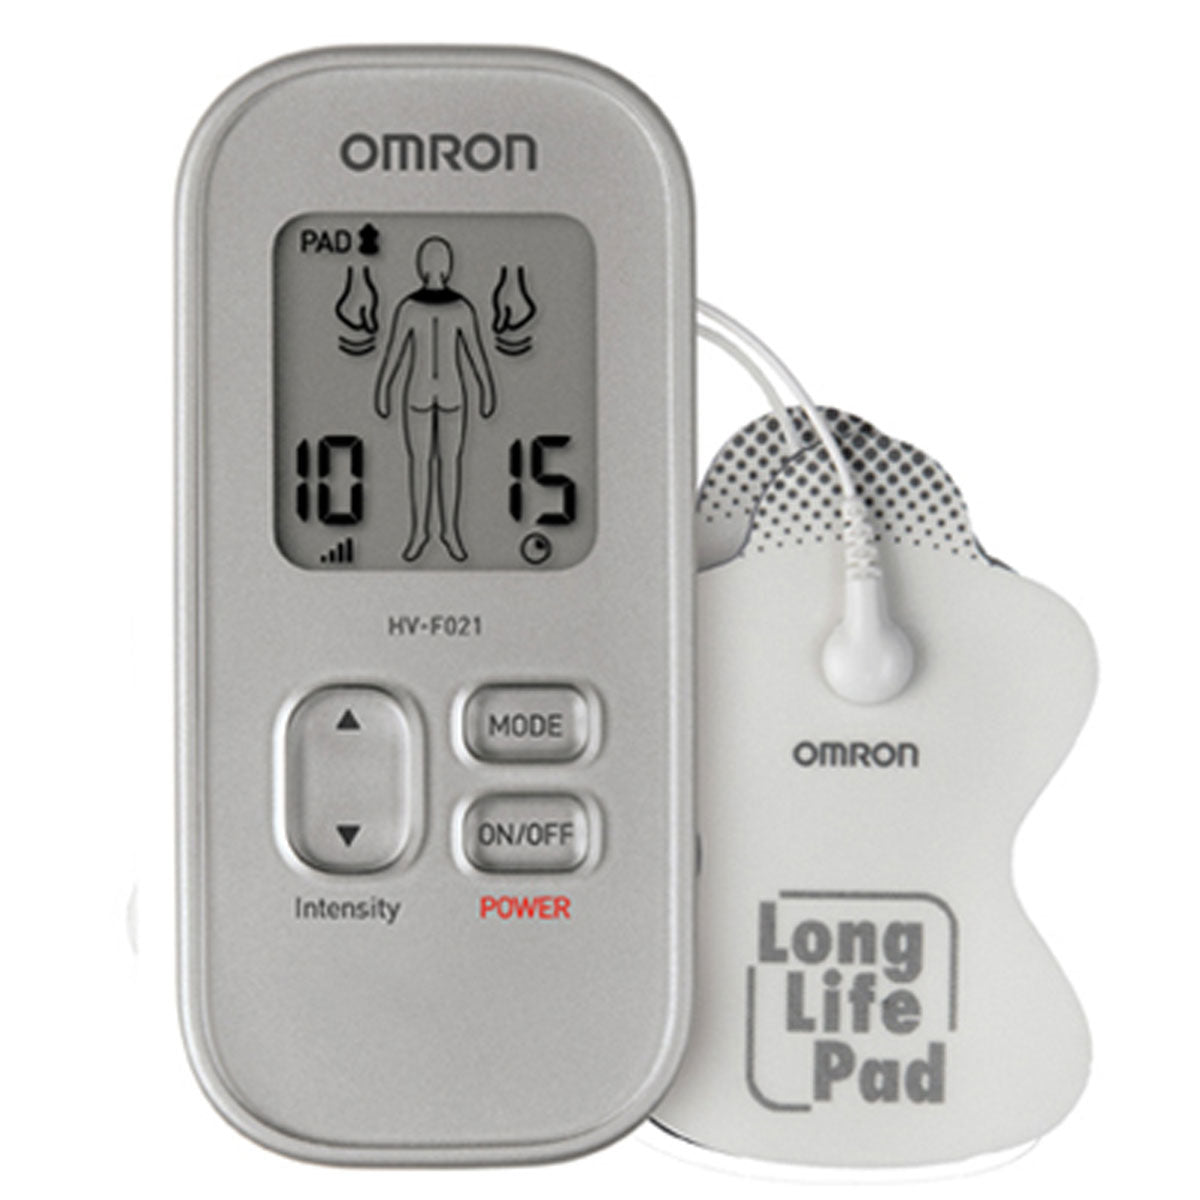 Omron HVF021 Deluxe TENS Therapy Device - Provides Drug-Free Pain Relief